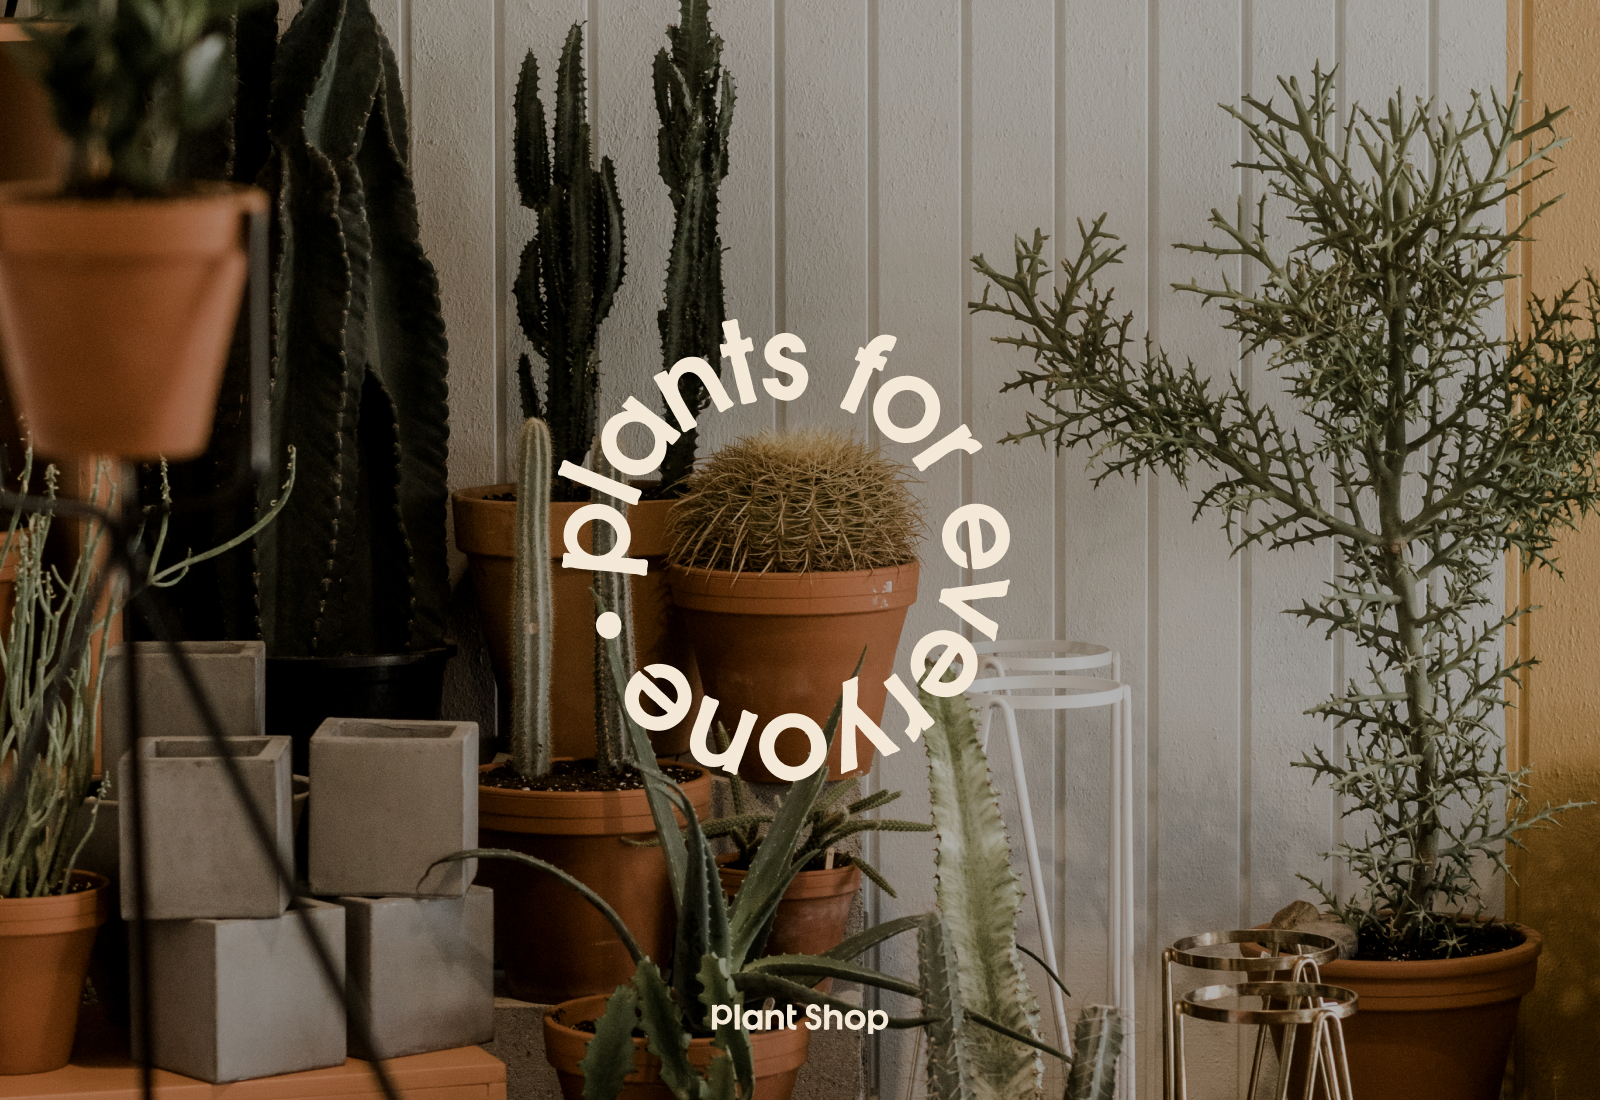 Plants for Everyone - Overtop a Photograph of Plants | Brand Identity for Plant Shop GR - Grand Rapids, MI